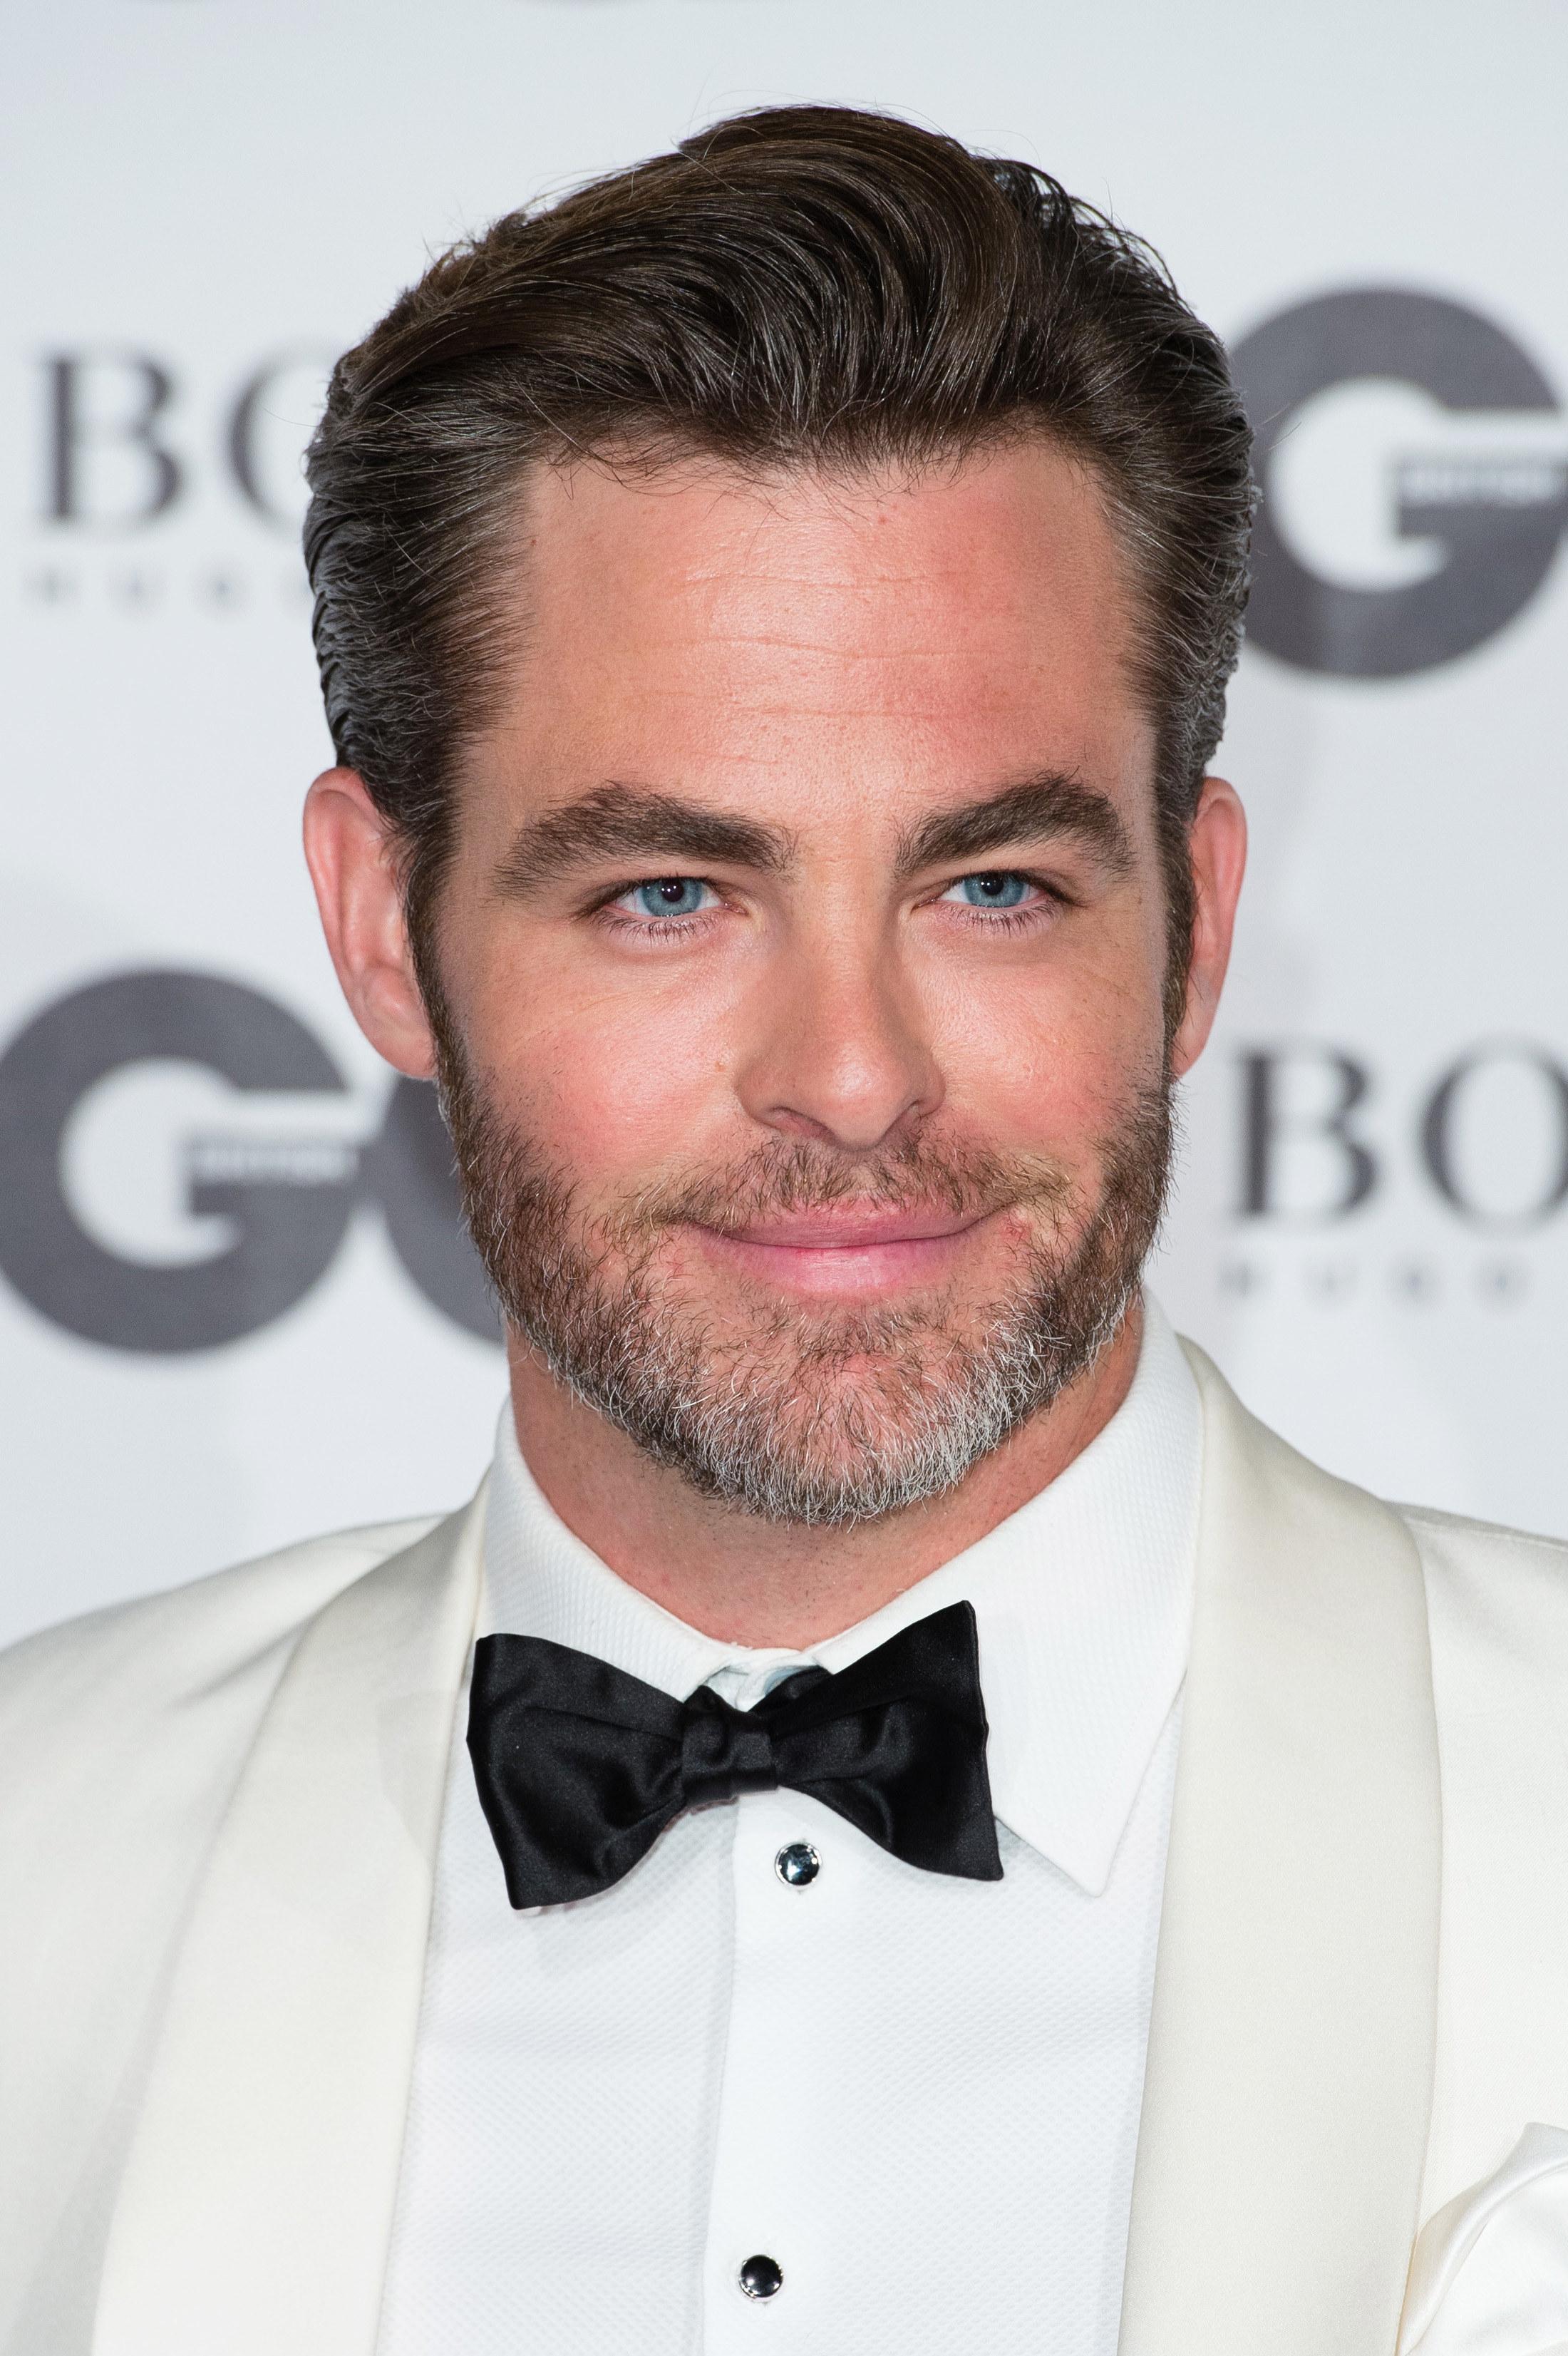 Pine at the GQ Men of the Year Awards in 2016